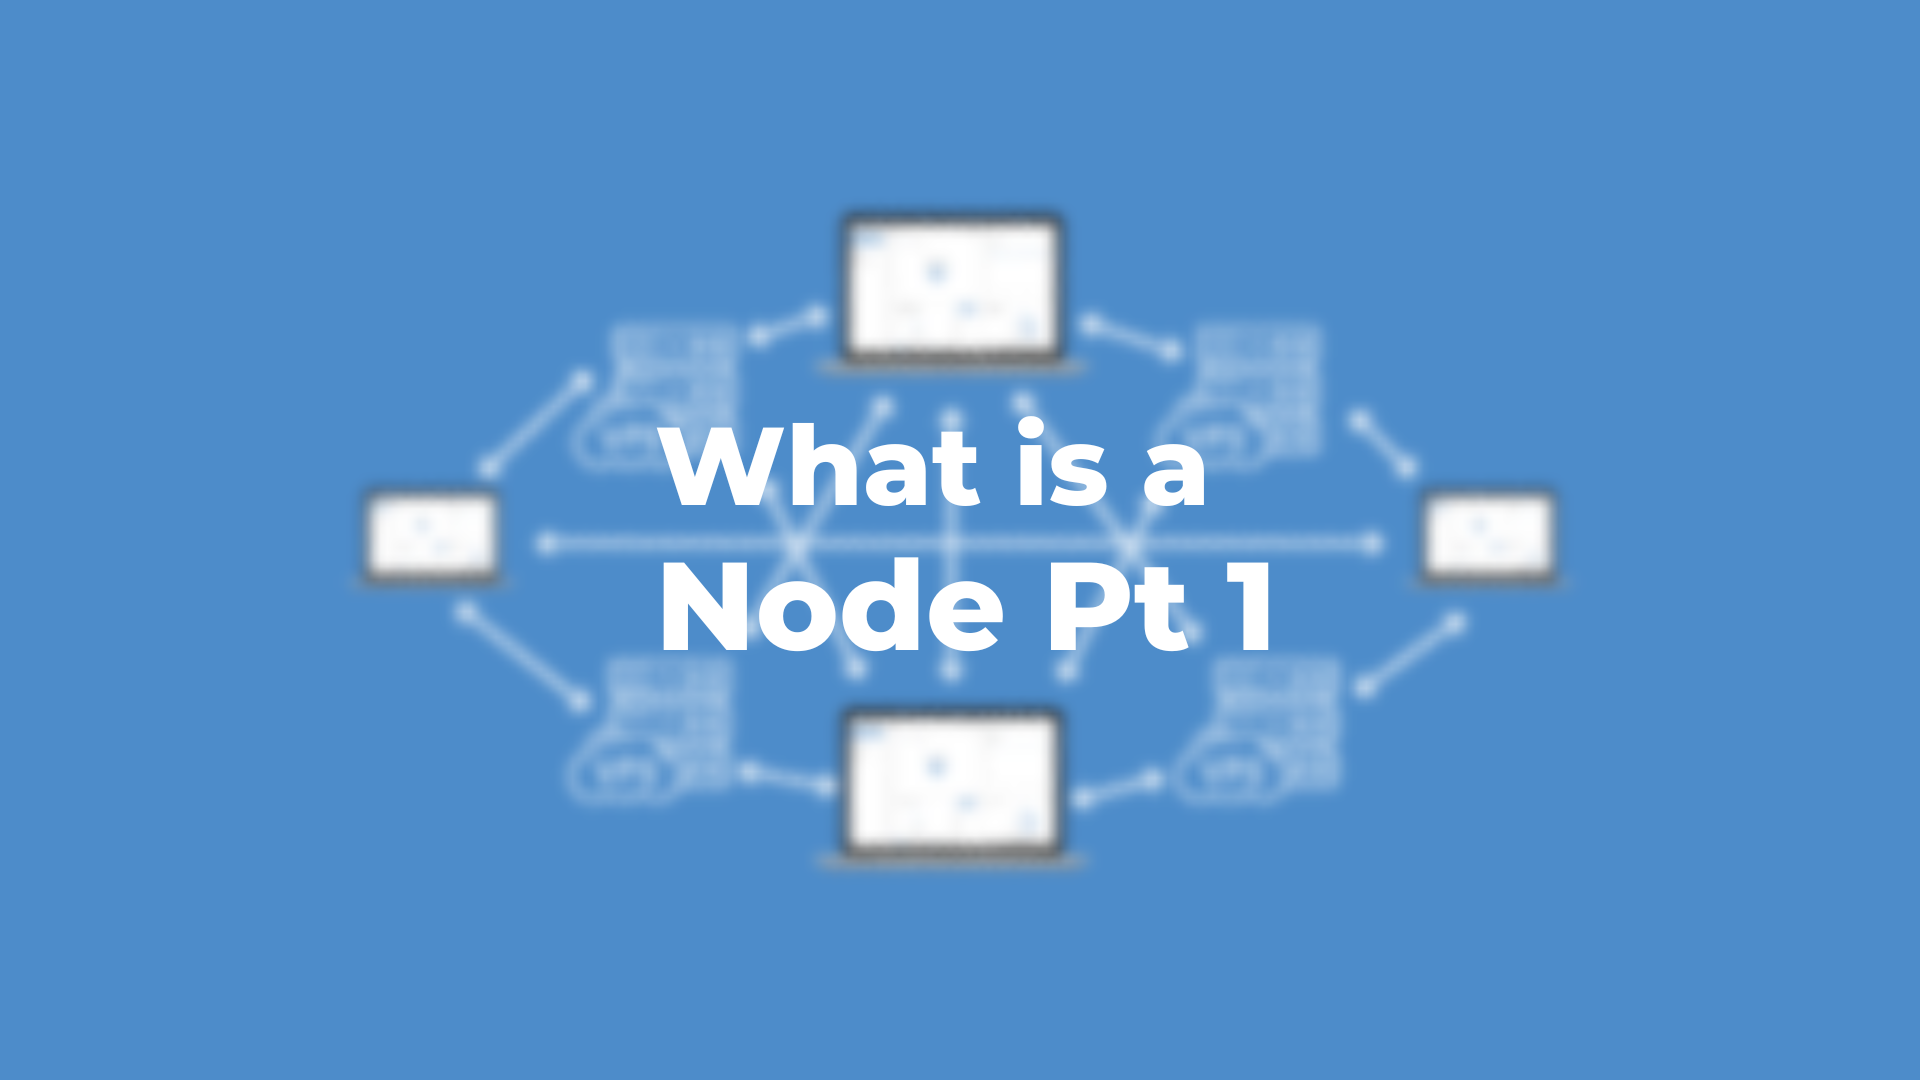 What Is a Node?